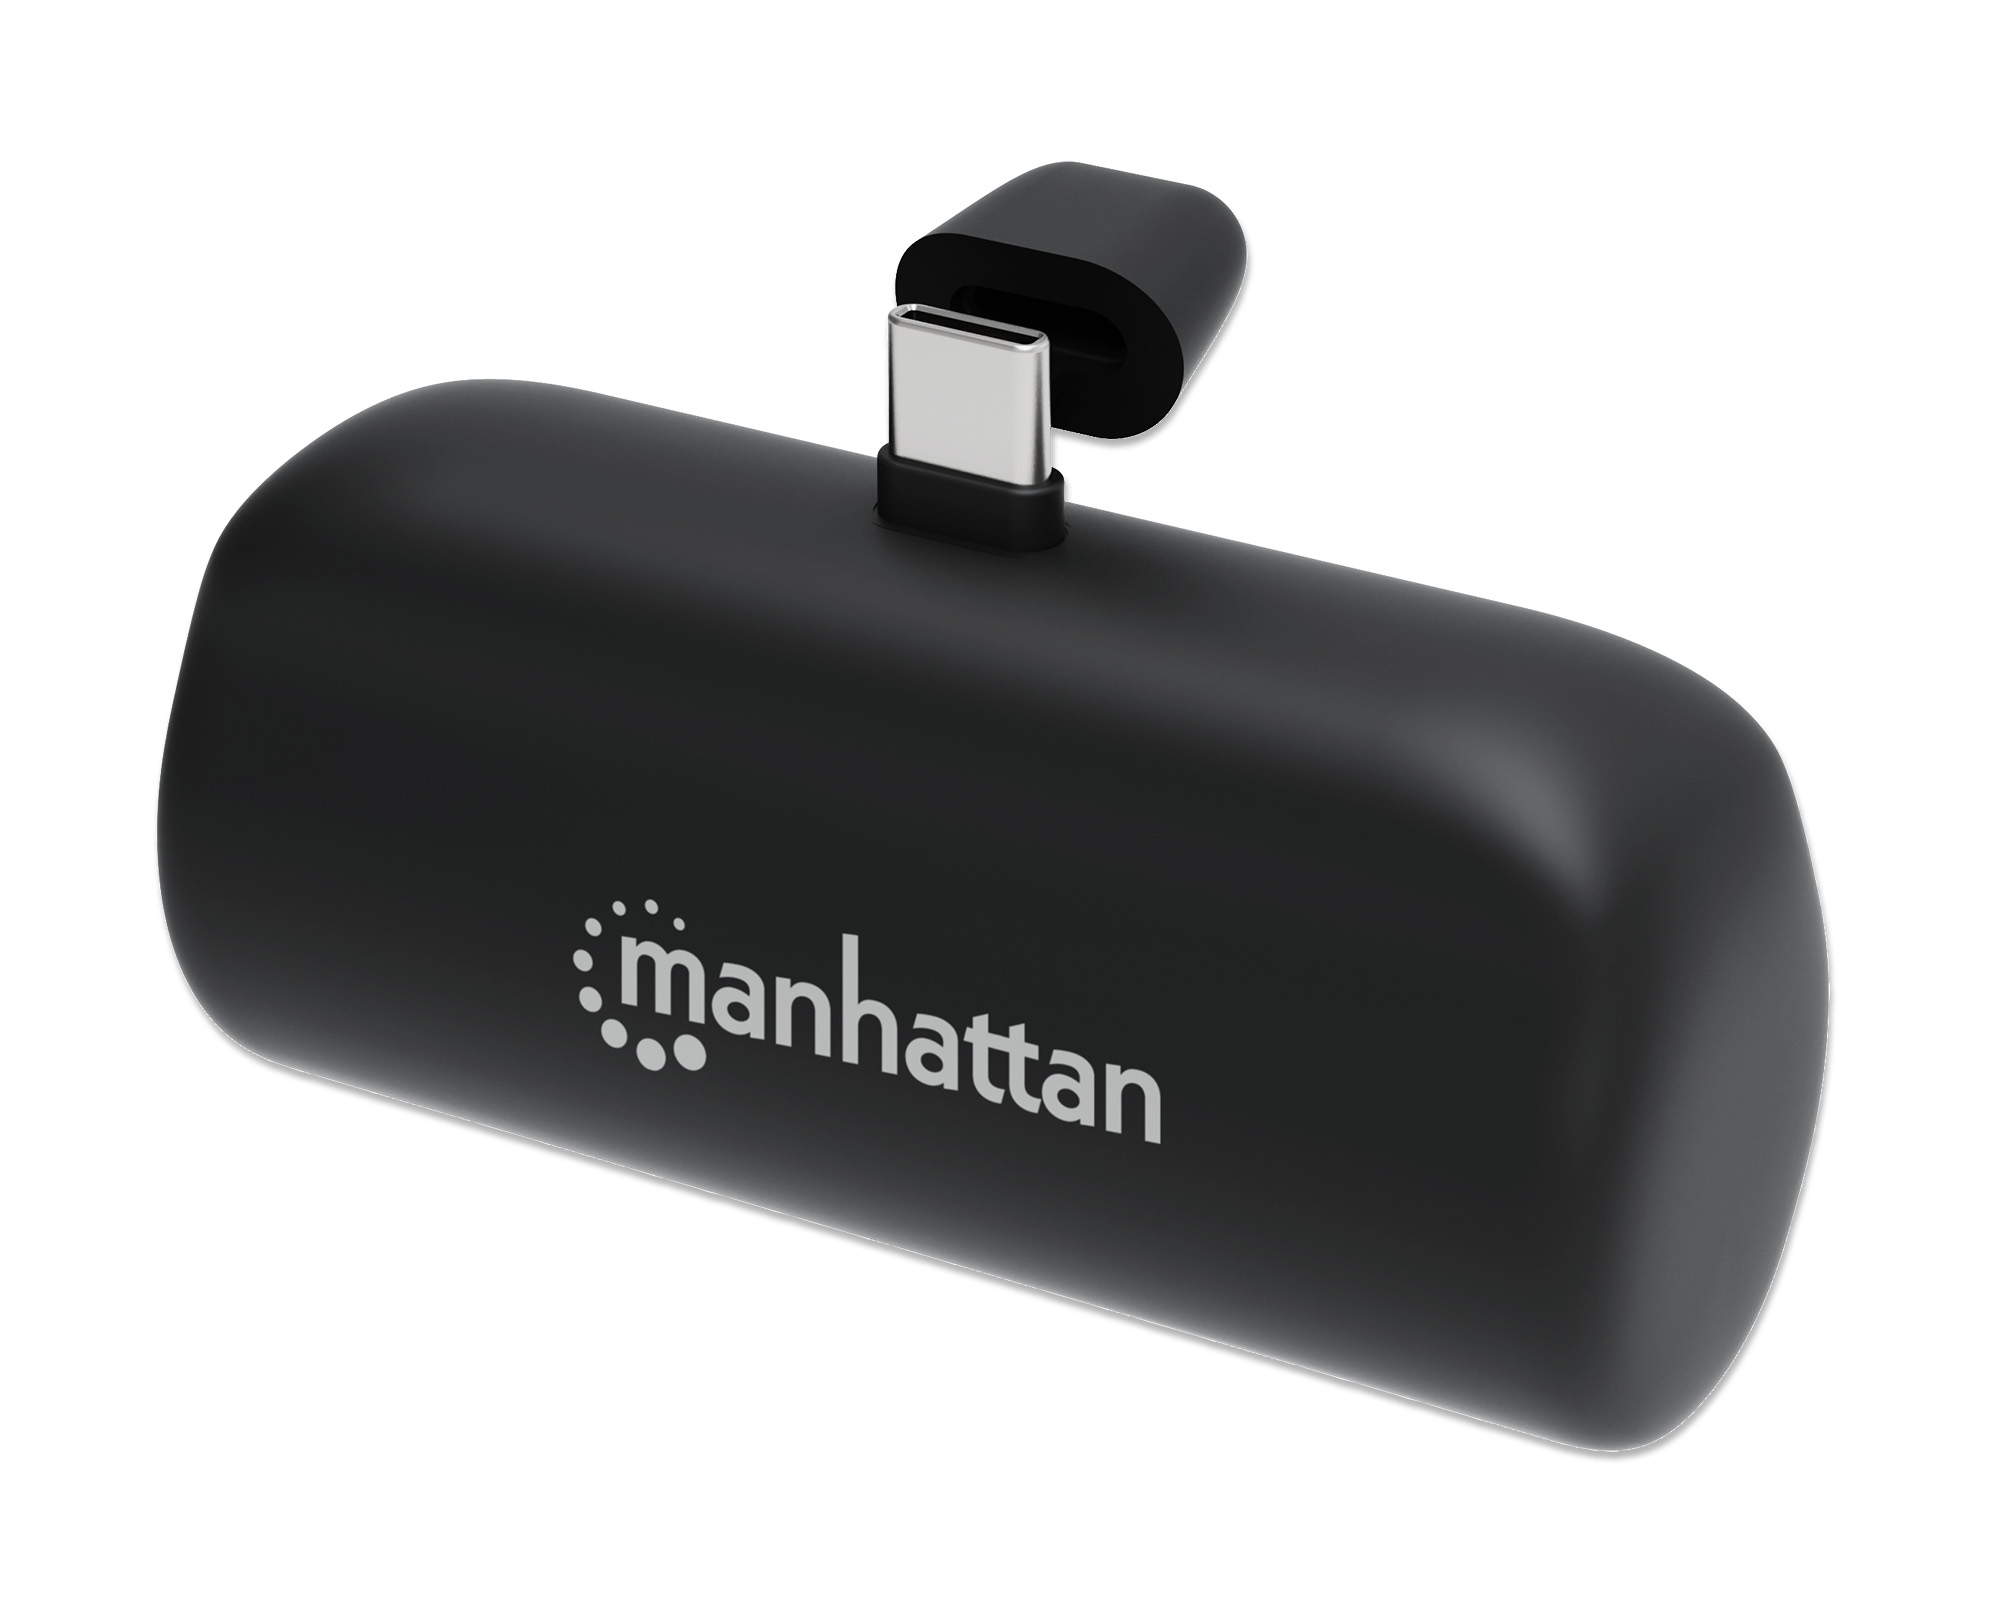 Manhattan Power Bank with integrated USB-C plug, 5000 mAh, Up to 20W output, Kickstand for Use as Charging Phone Holder, Black, One Year Warranty